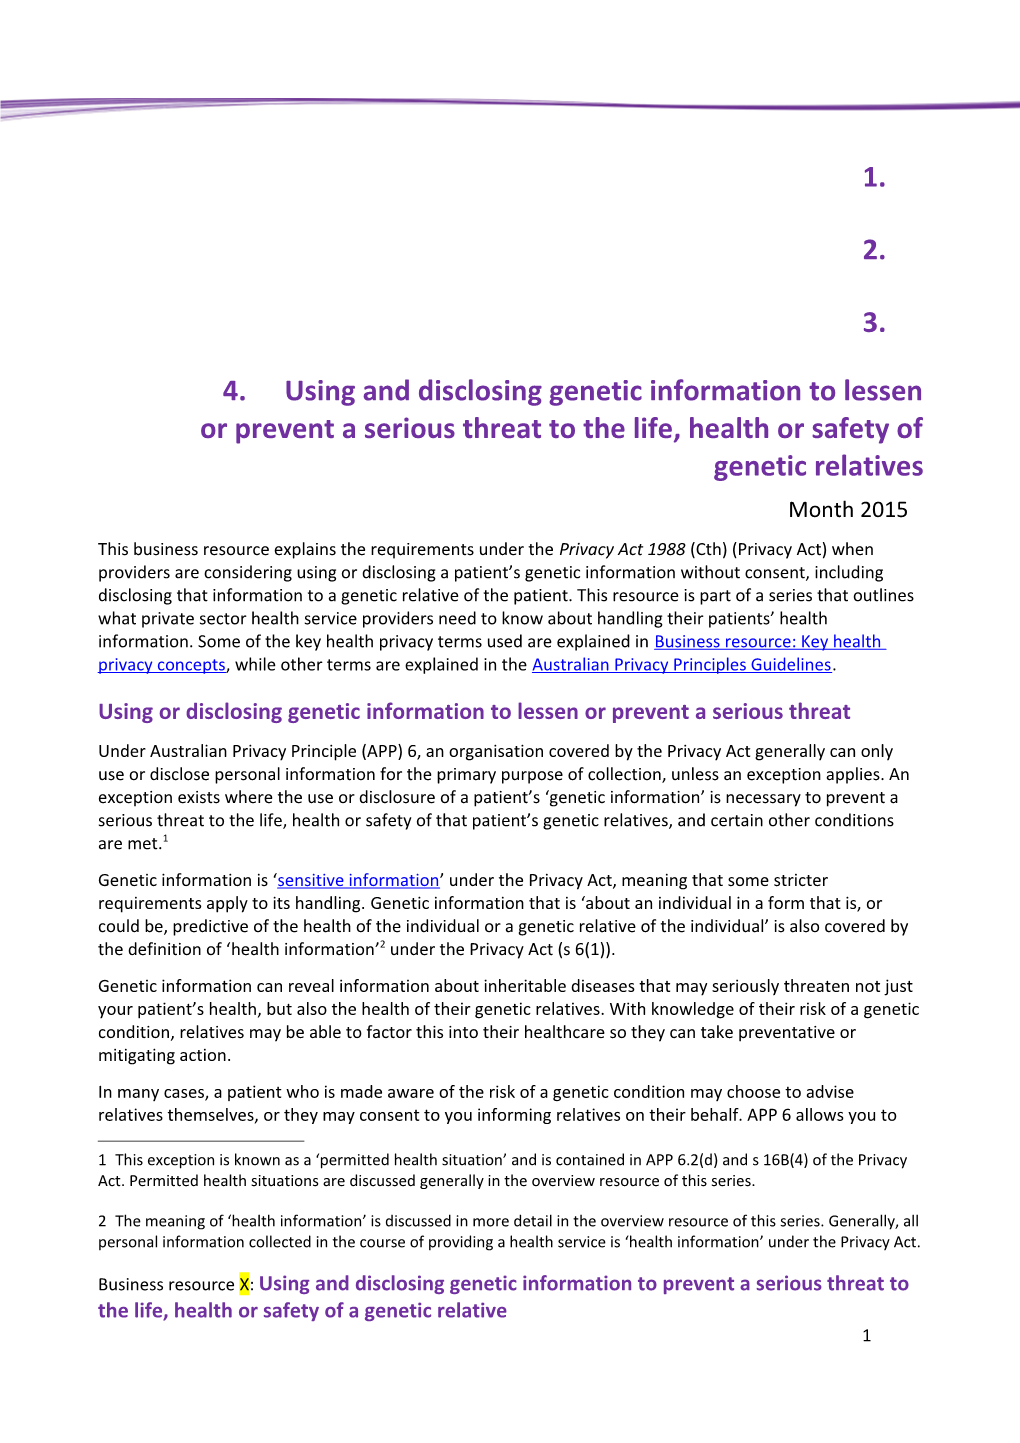 Using Or Disclosing Genetic Information to Lessen Or Prevent a Serious Threat